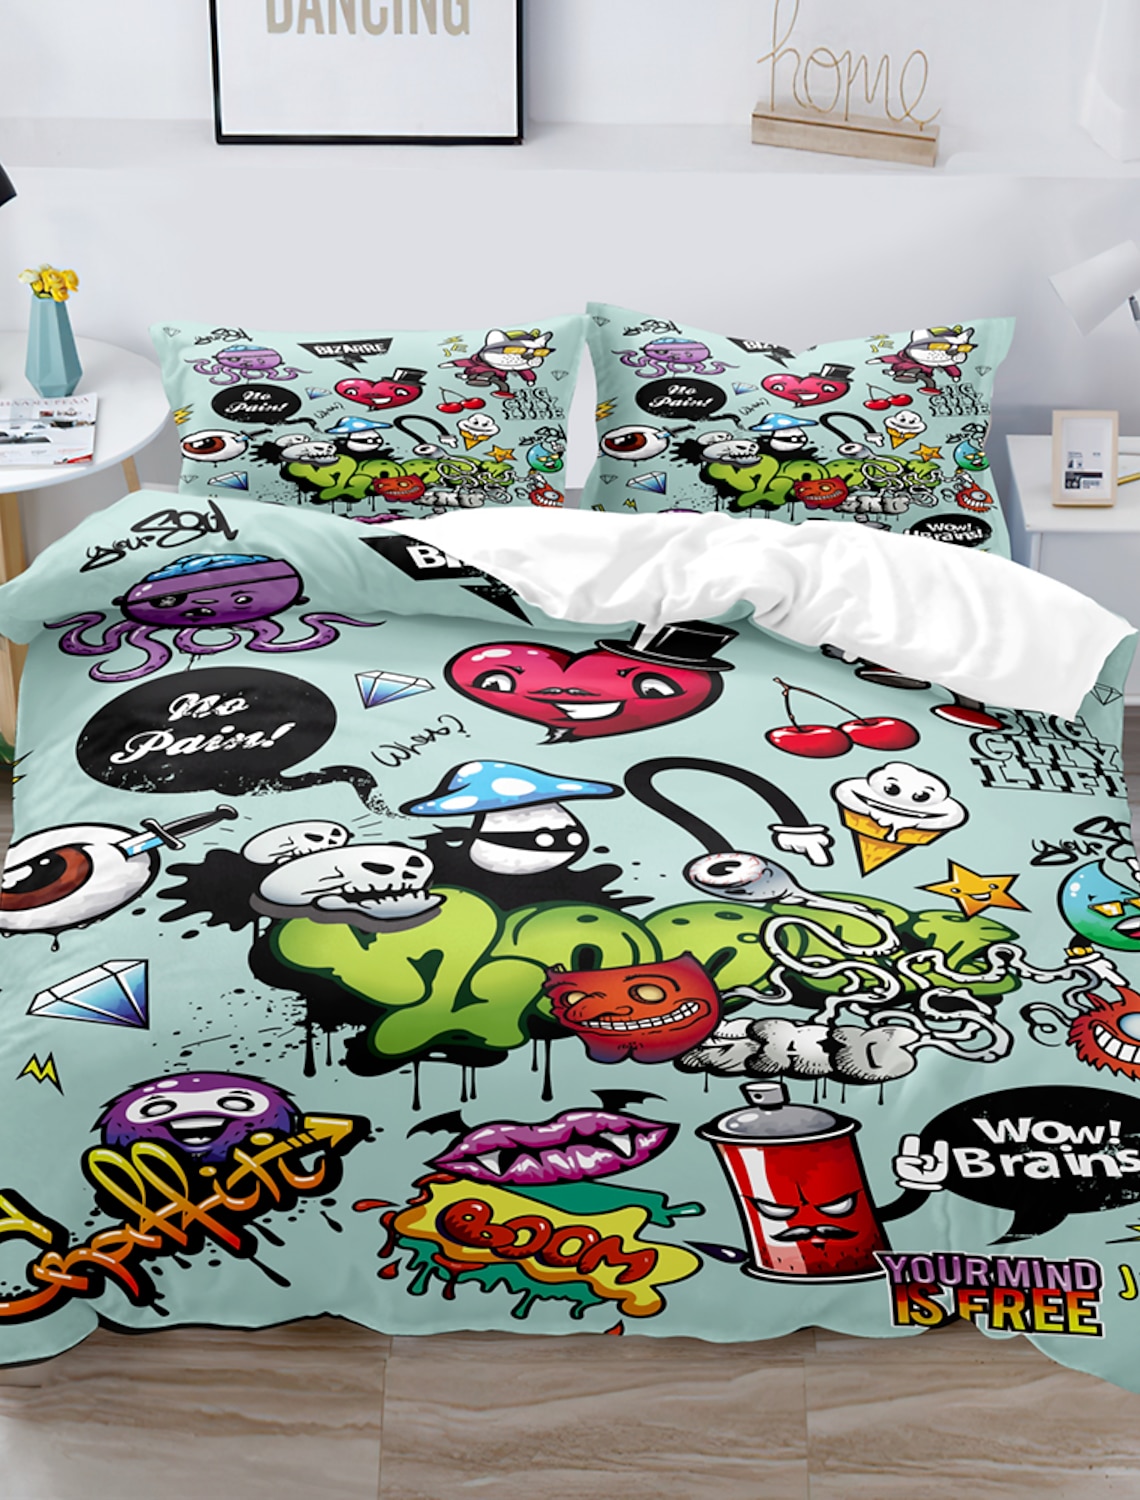 Lampshades Ideal To Match Graffiti Duvets Covers & Graffiti Wall Decals Stickers 